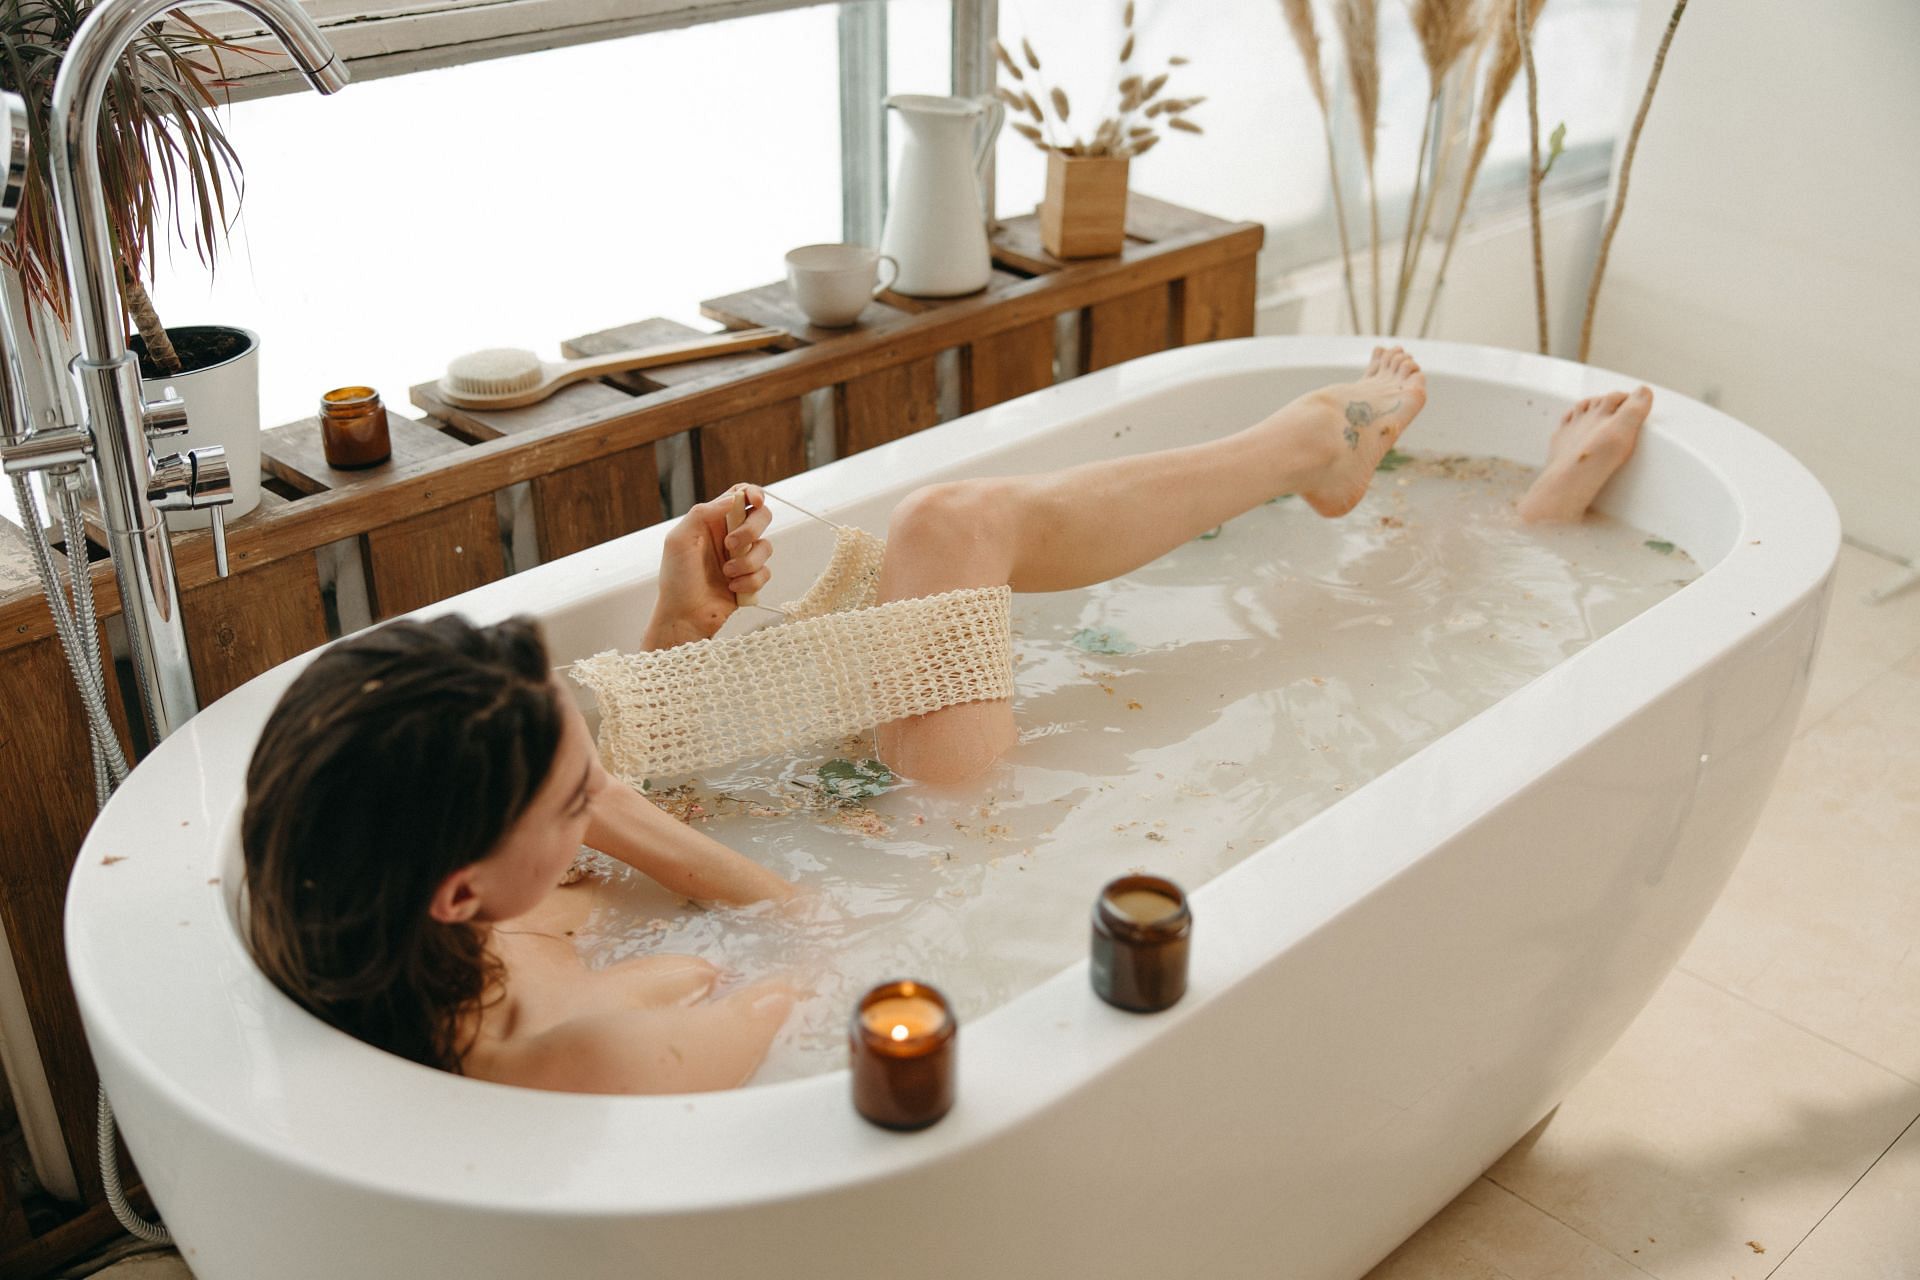 How to remove tan: Taking a bath can help reduce tan from tanning products (Image via Pexels/Yaroslav Shuraev)